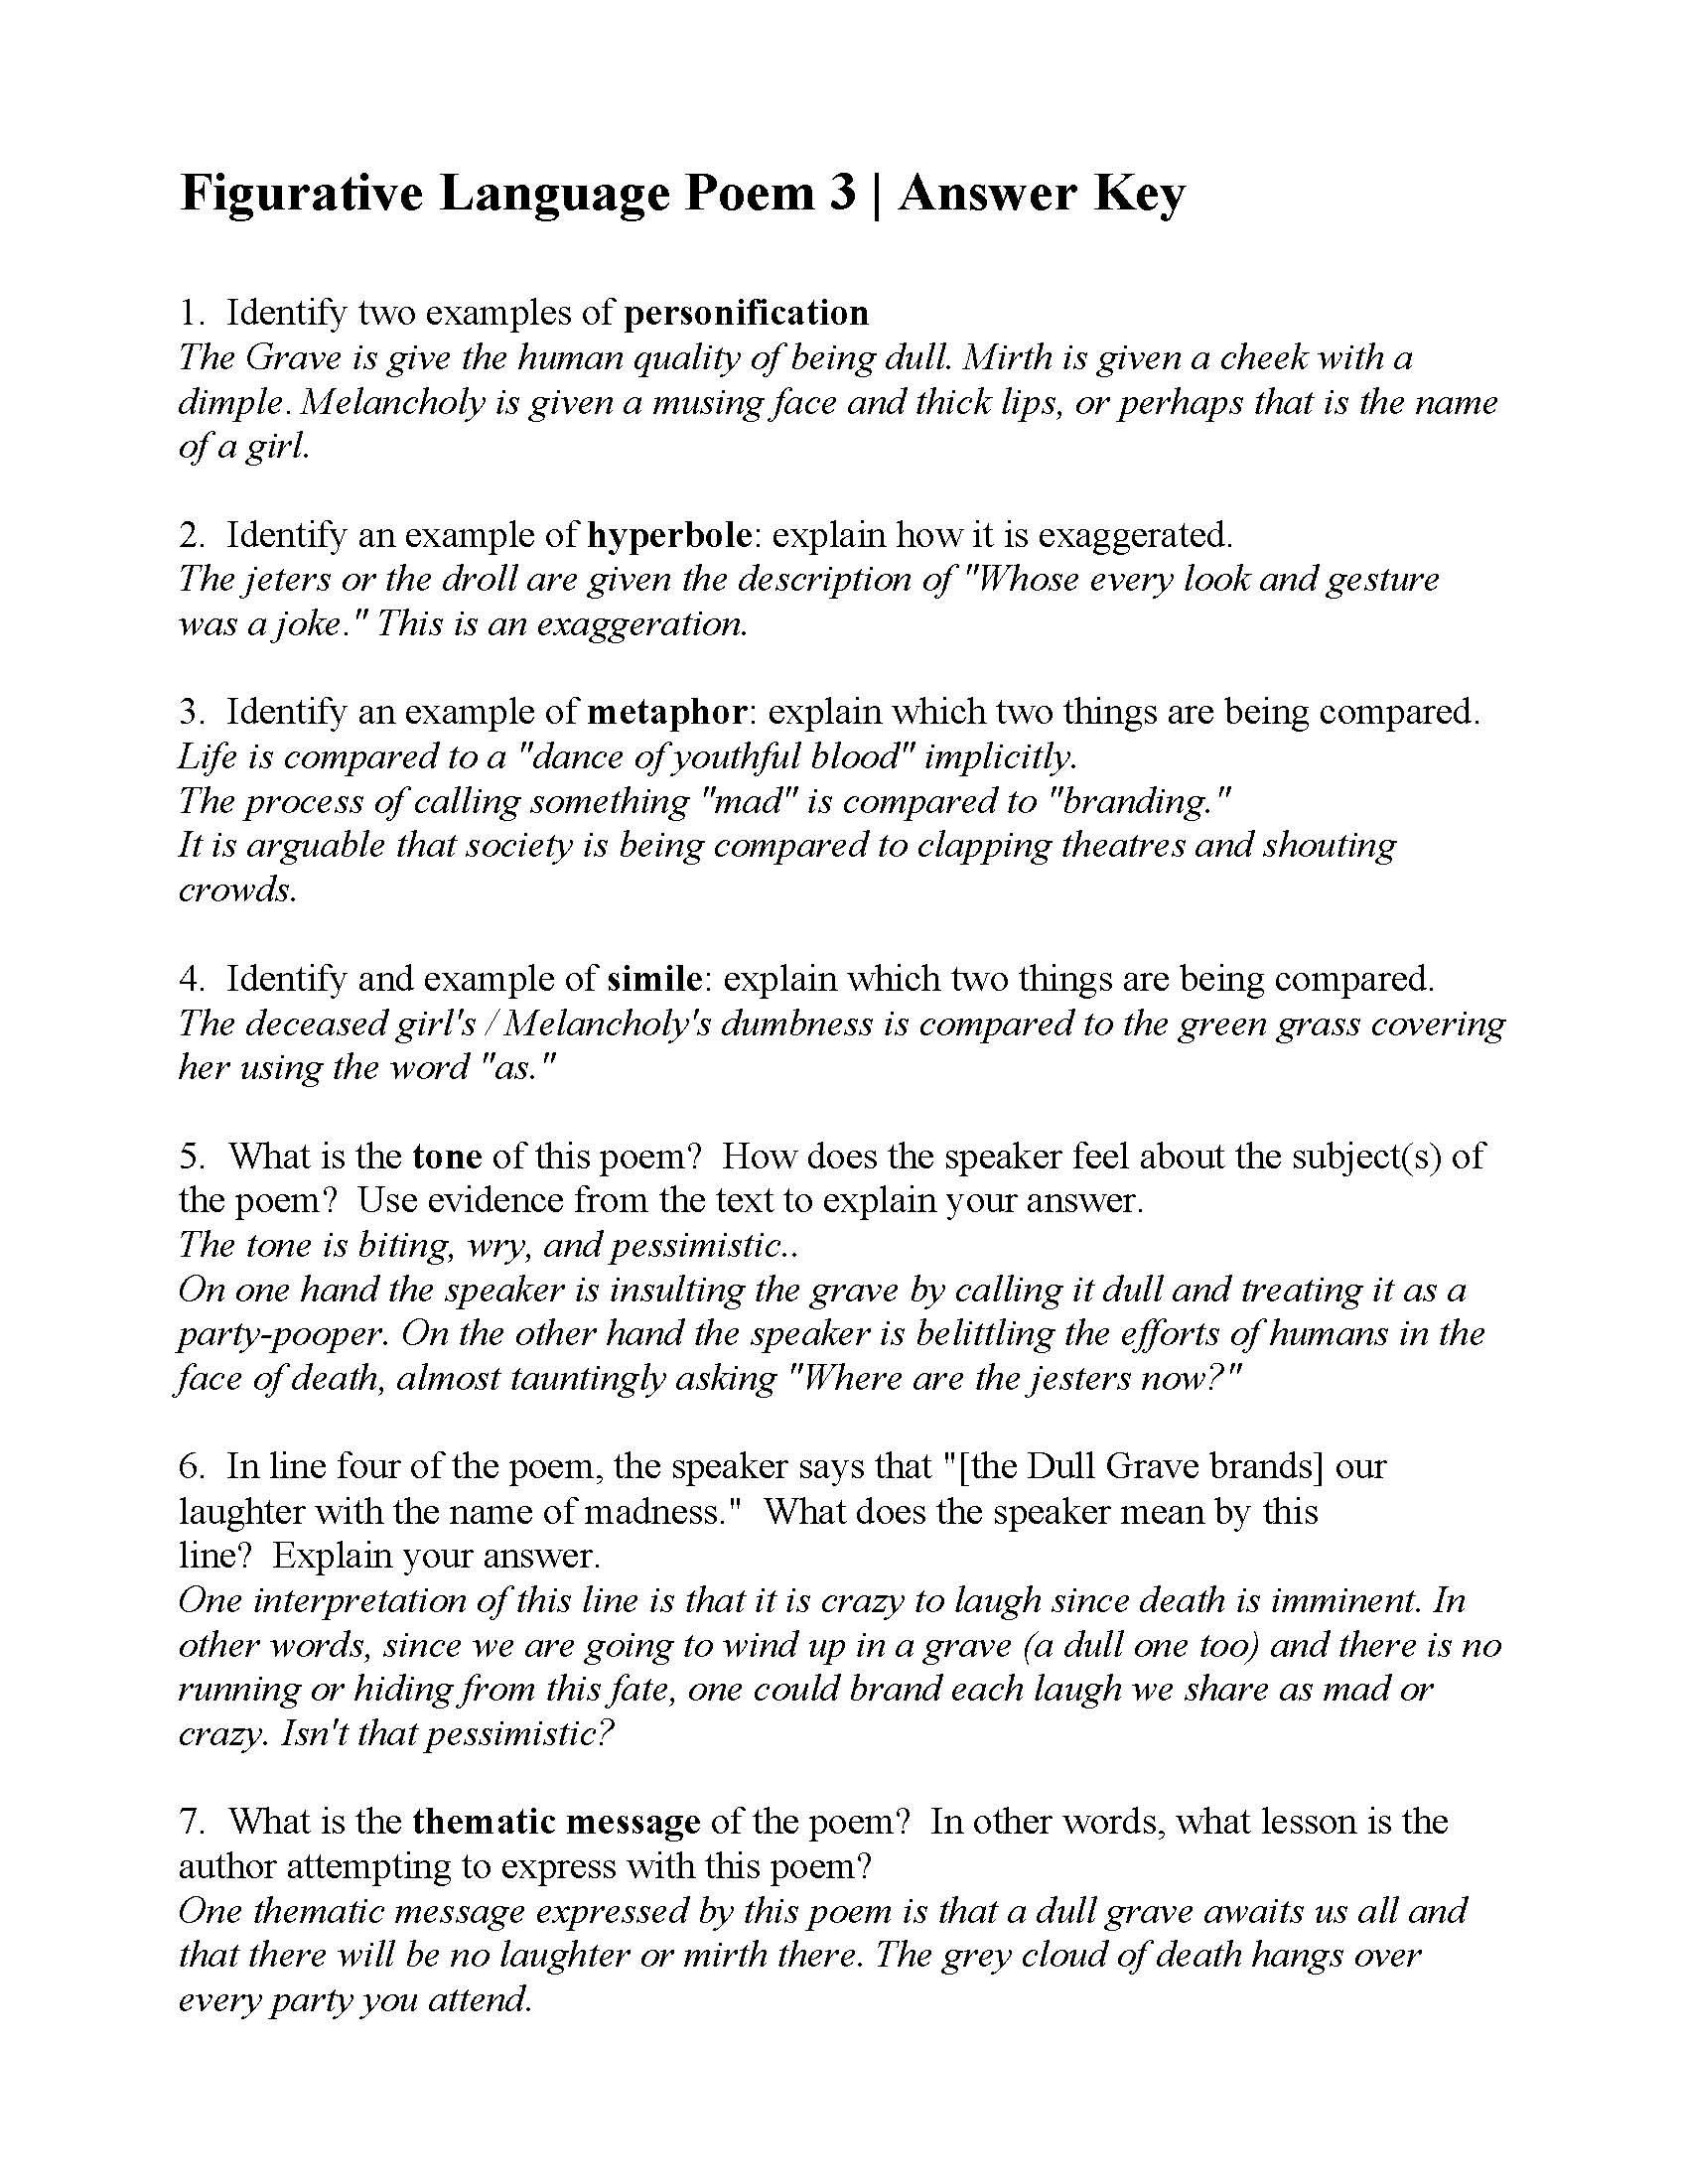 Literary Devices Worksheet Pdf This is the Answer Key for the Figurative Language Poem 3